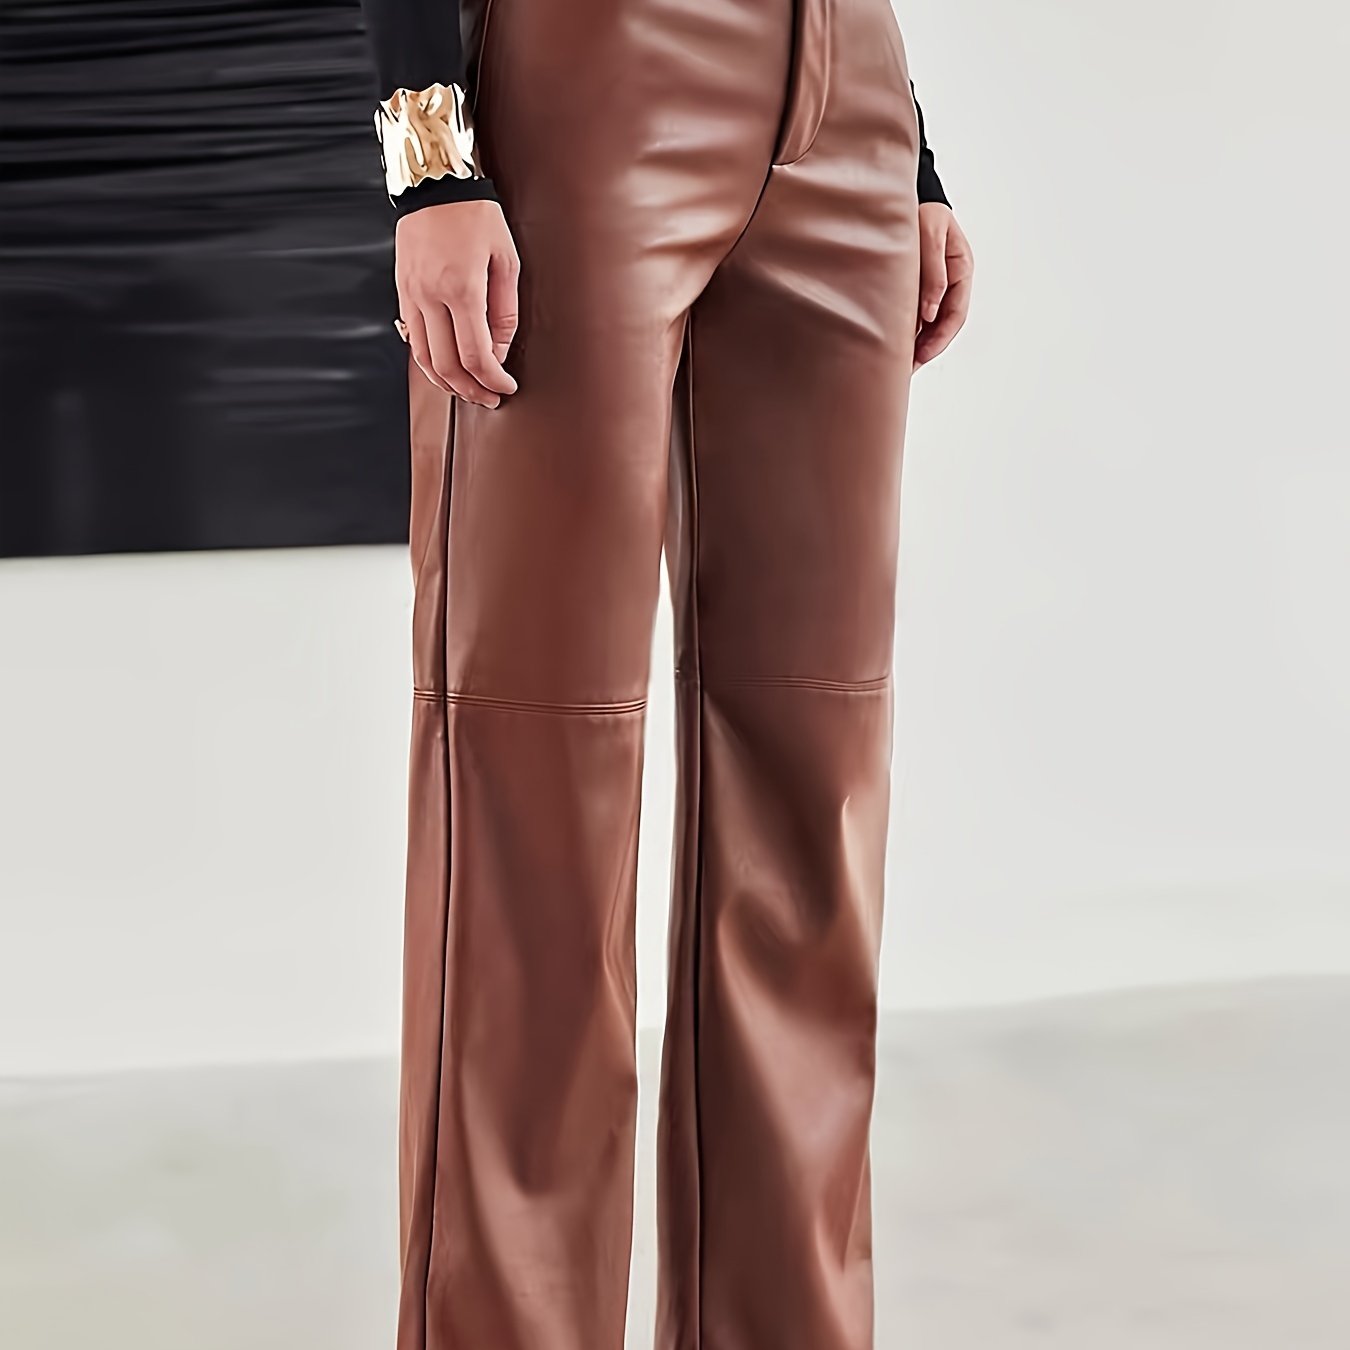 High Waist PU Leather Petite Faux Leather Trousers With Pockets For Women  Fashionable Streetwear For Slimming And Comfortable Wear From Jiejingg,  $18.29